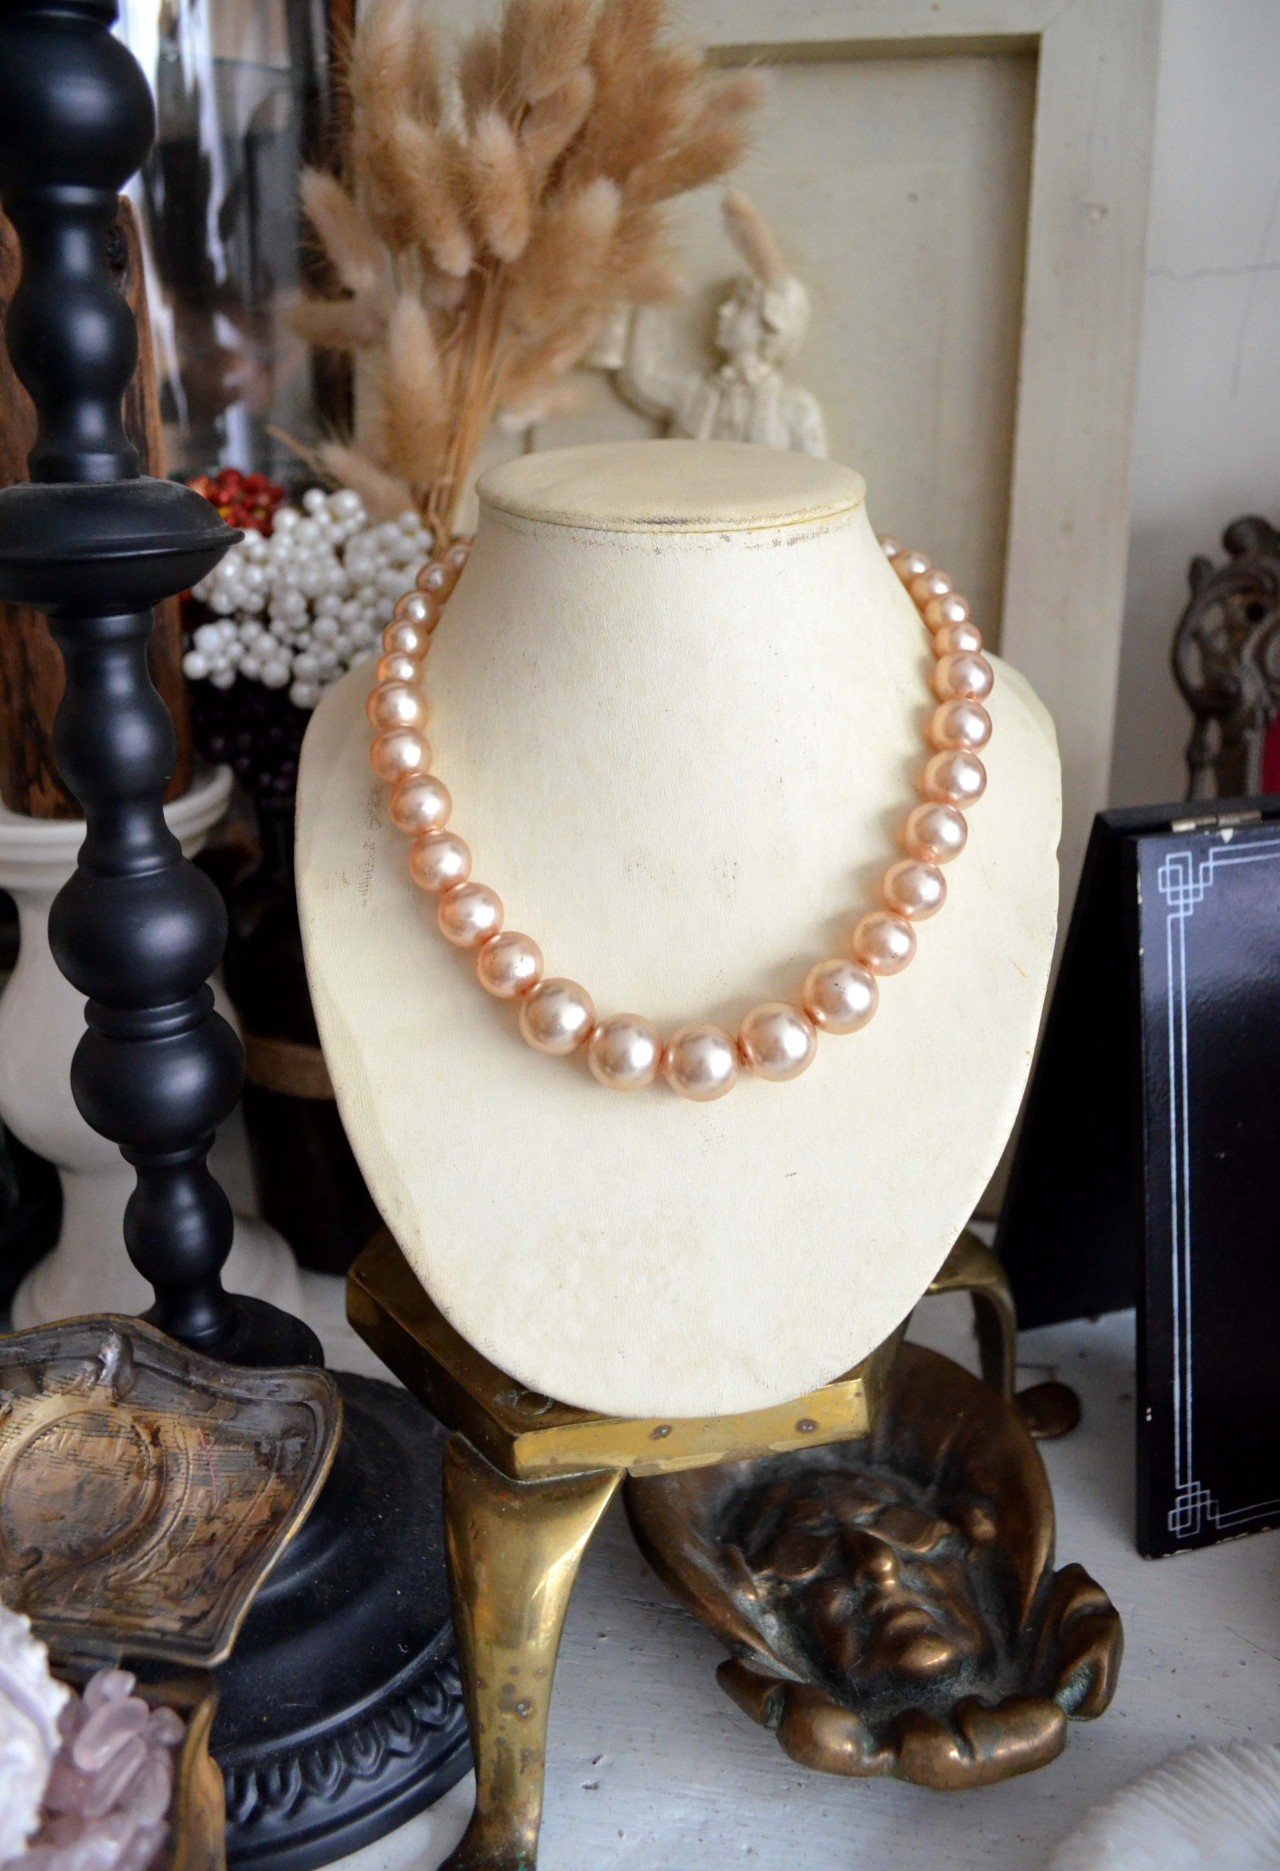 chanel white pearl necklace vintage